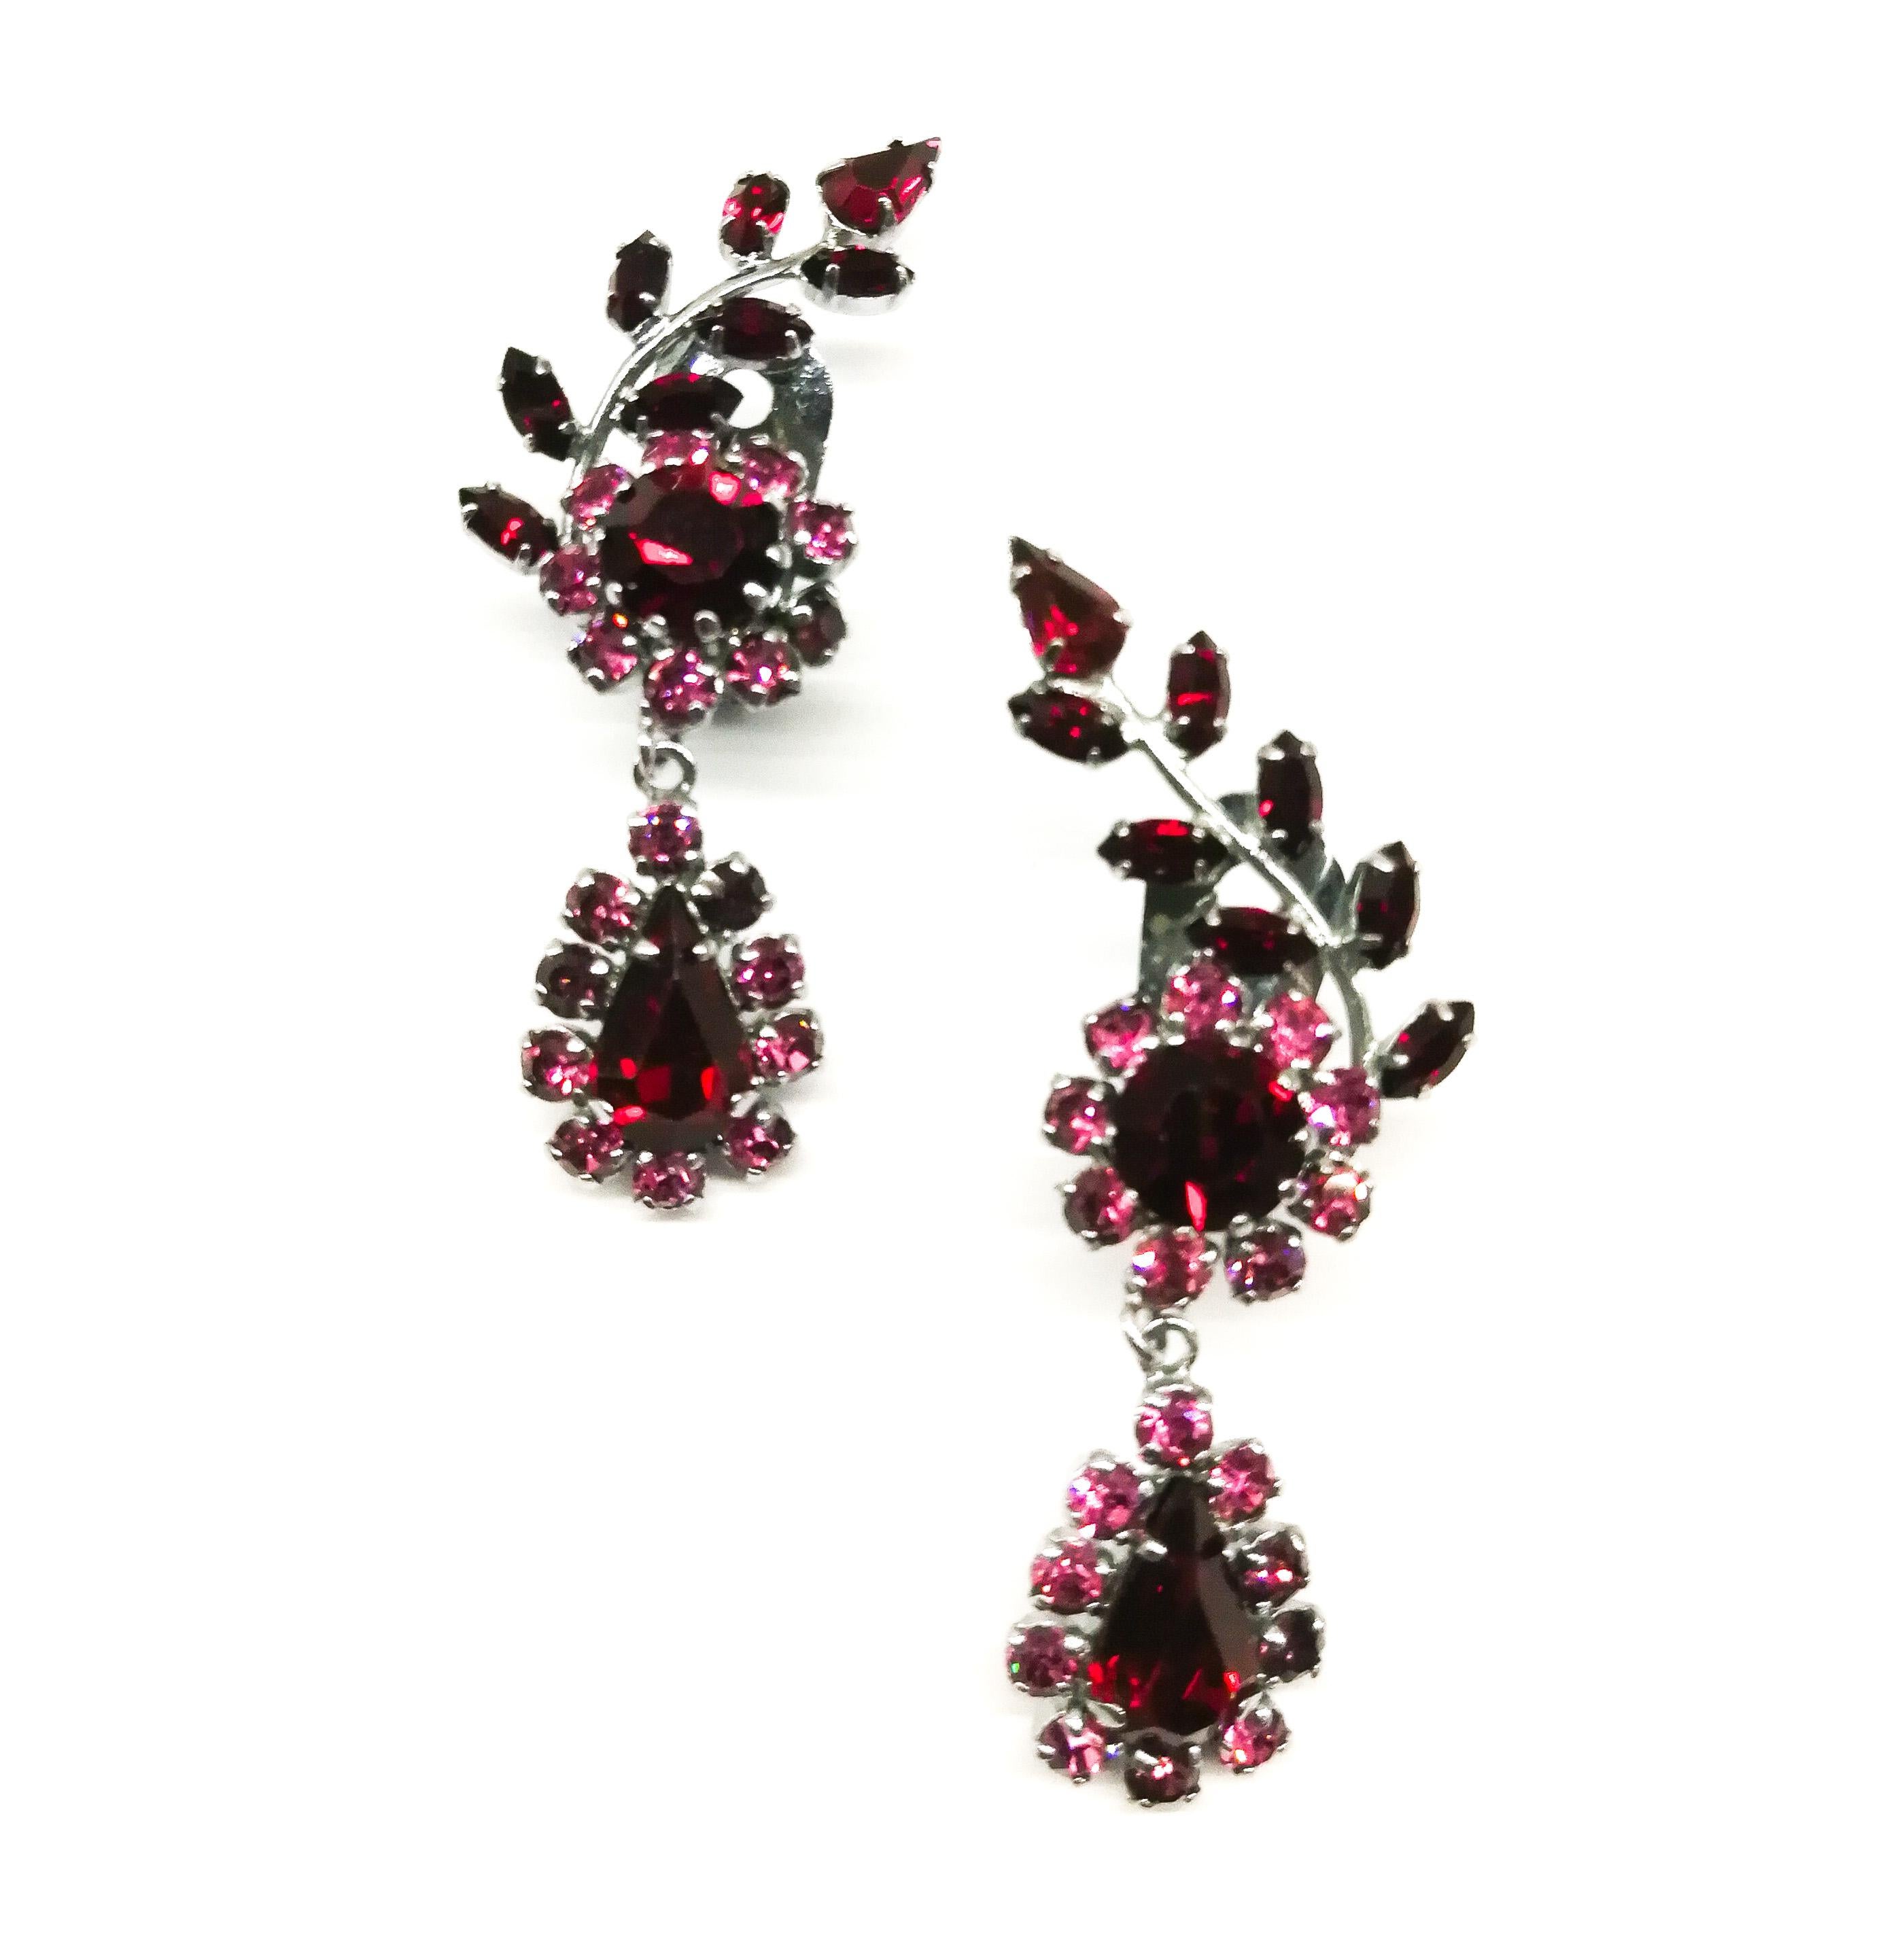 Delicate and eye catching earrings, with the 'leaf' going up the ear, and a tear shaped drop hanging down, all catching the light. The pink and ruby stones  highlight each other beautifully.
Perfect and so easy to wear with a simple sweater, a